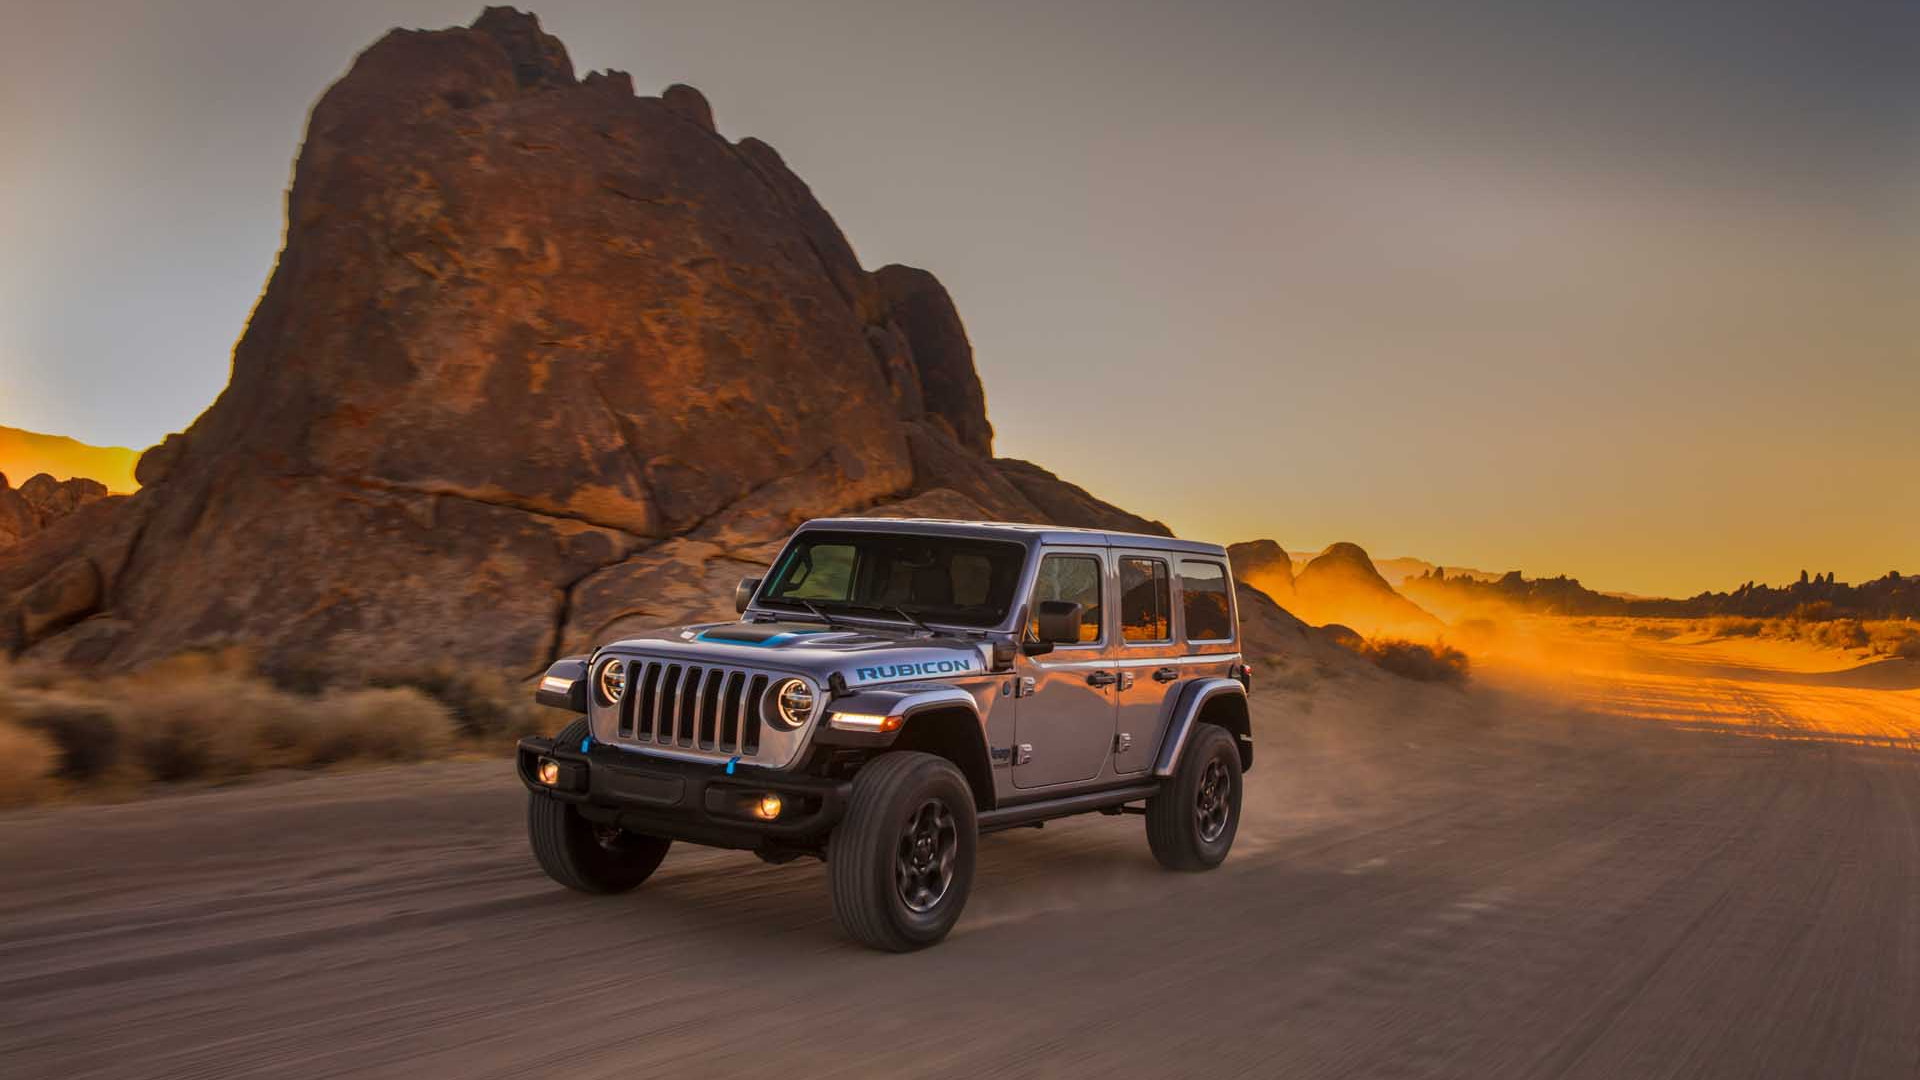 2021 Jeep Wrangler 4xe plug-in hybrid: Strong, silent type starts at $49,490